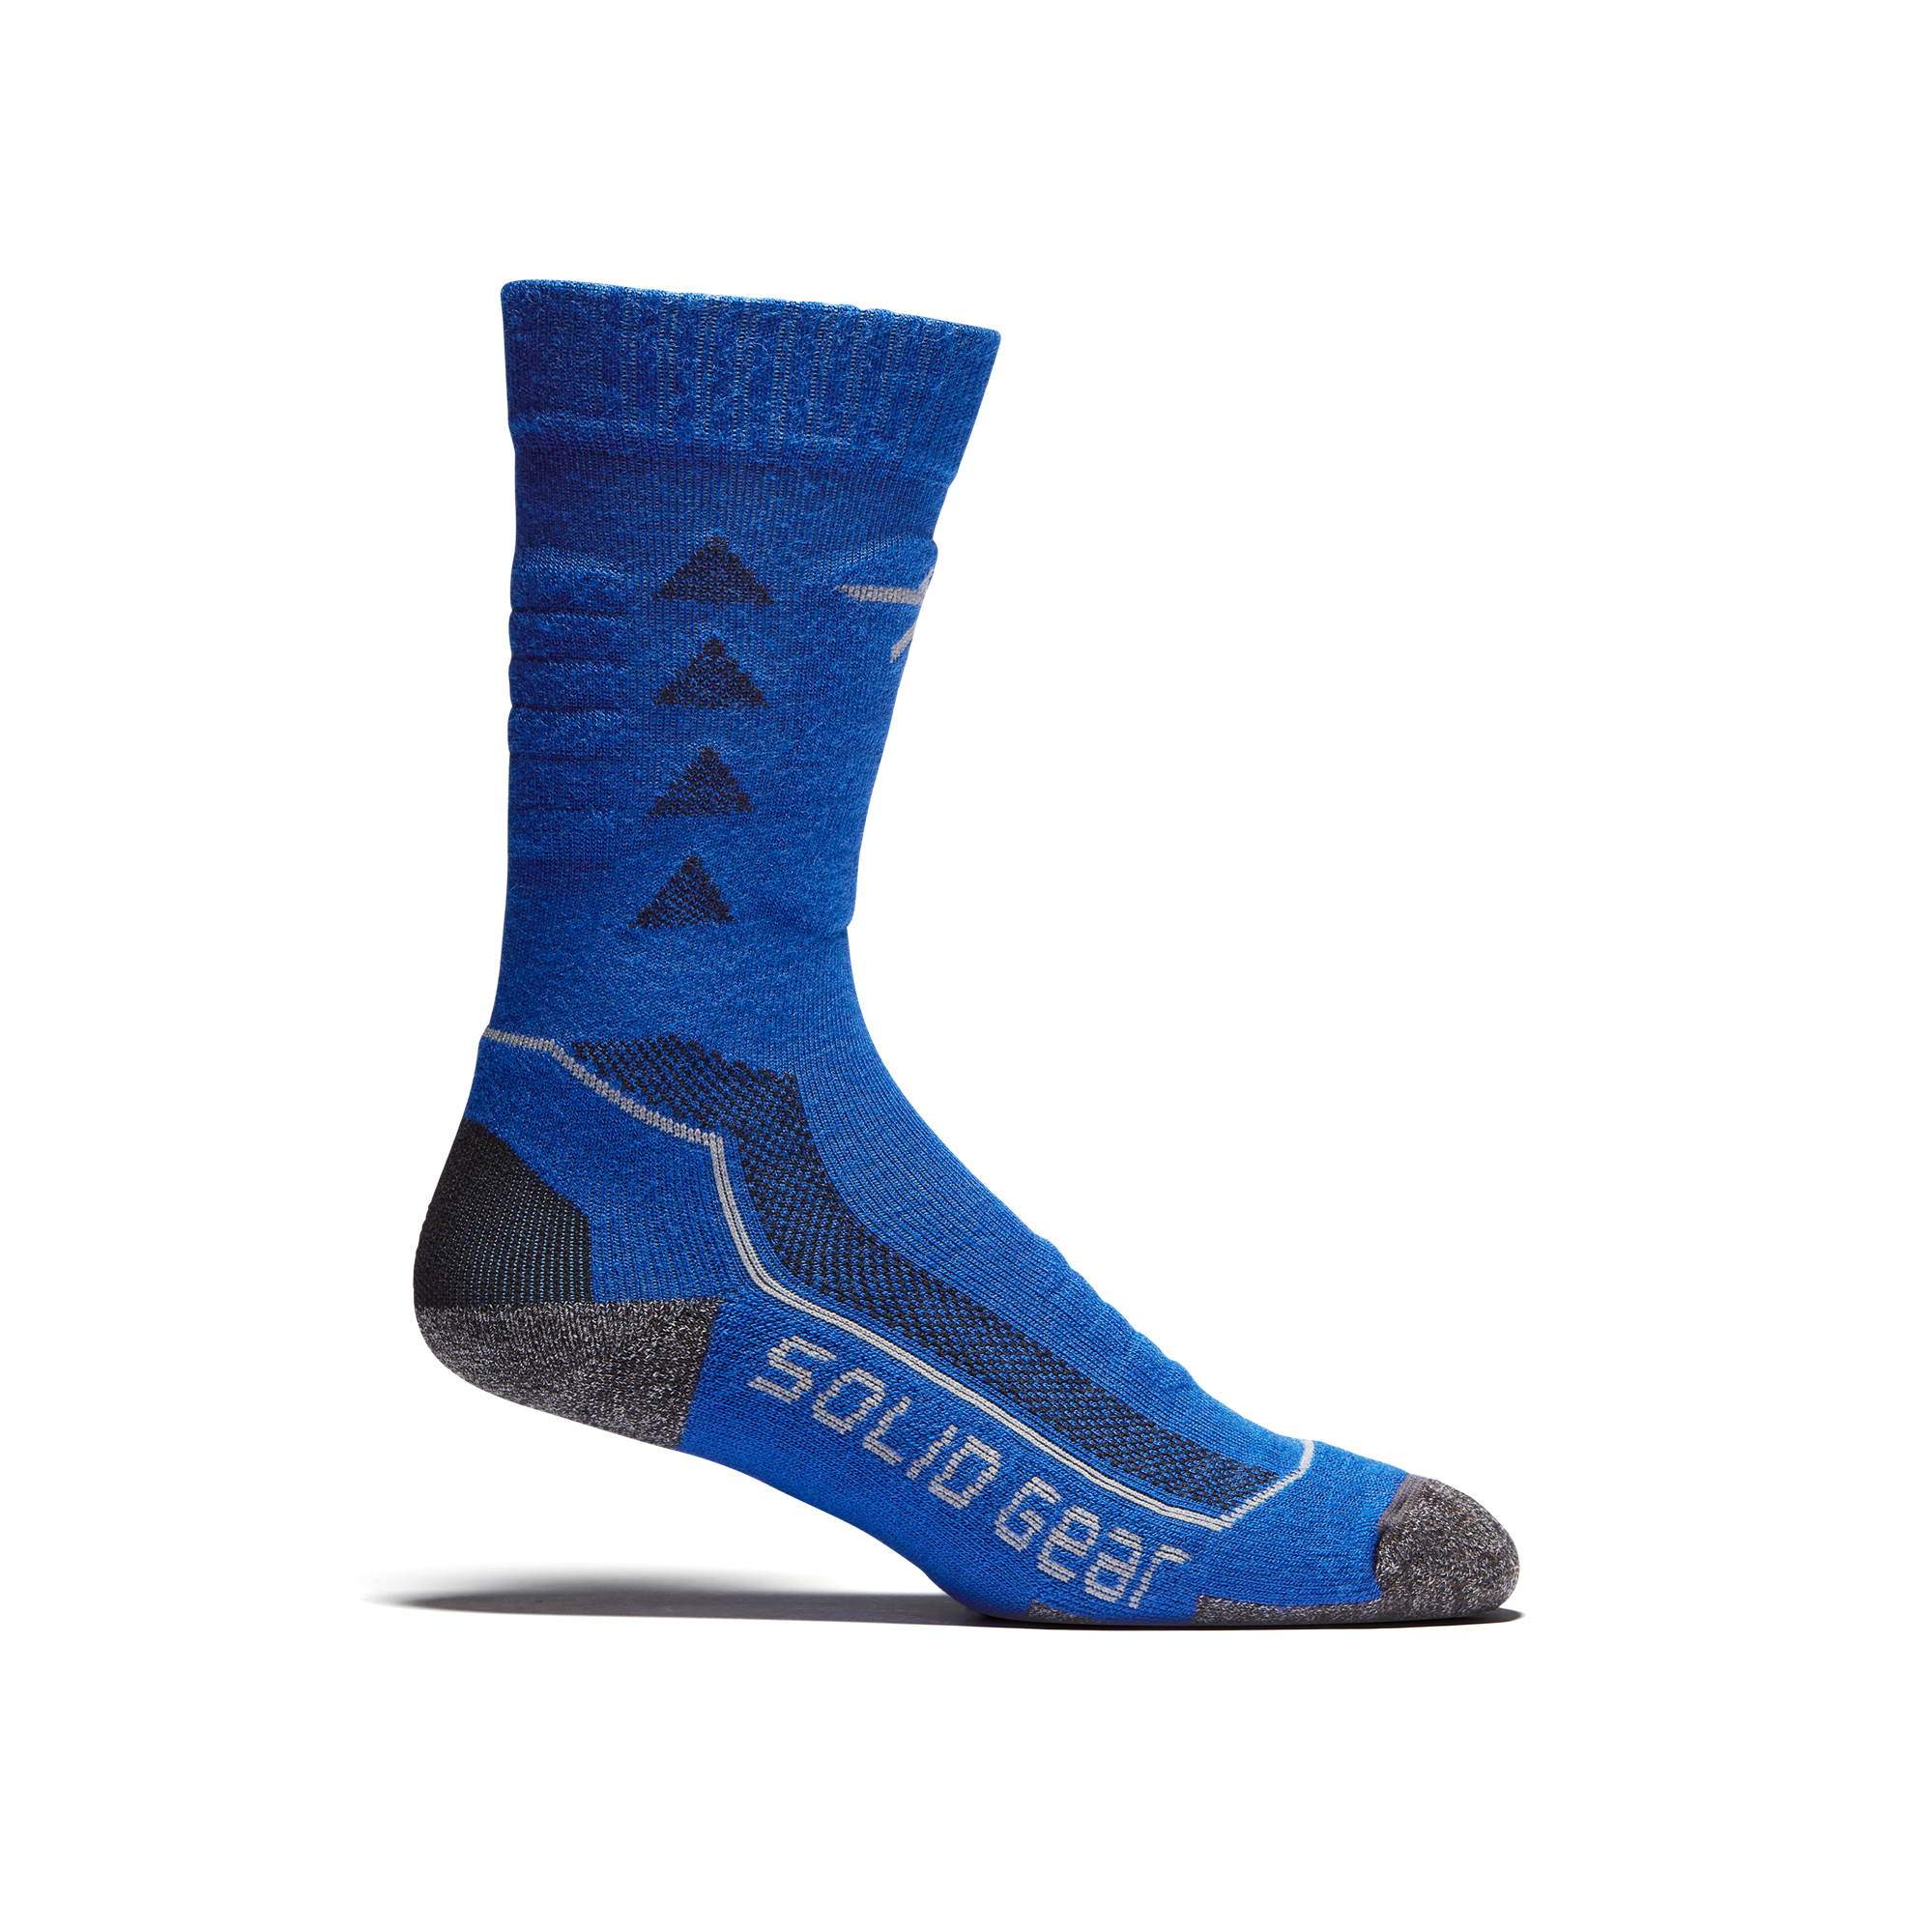 Solid Gear Extreme Performance Winter Socks